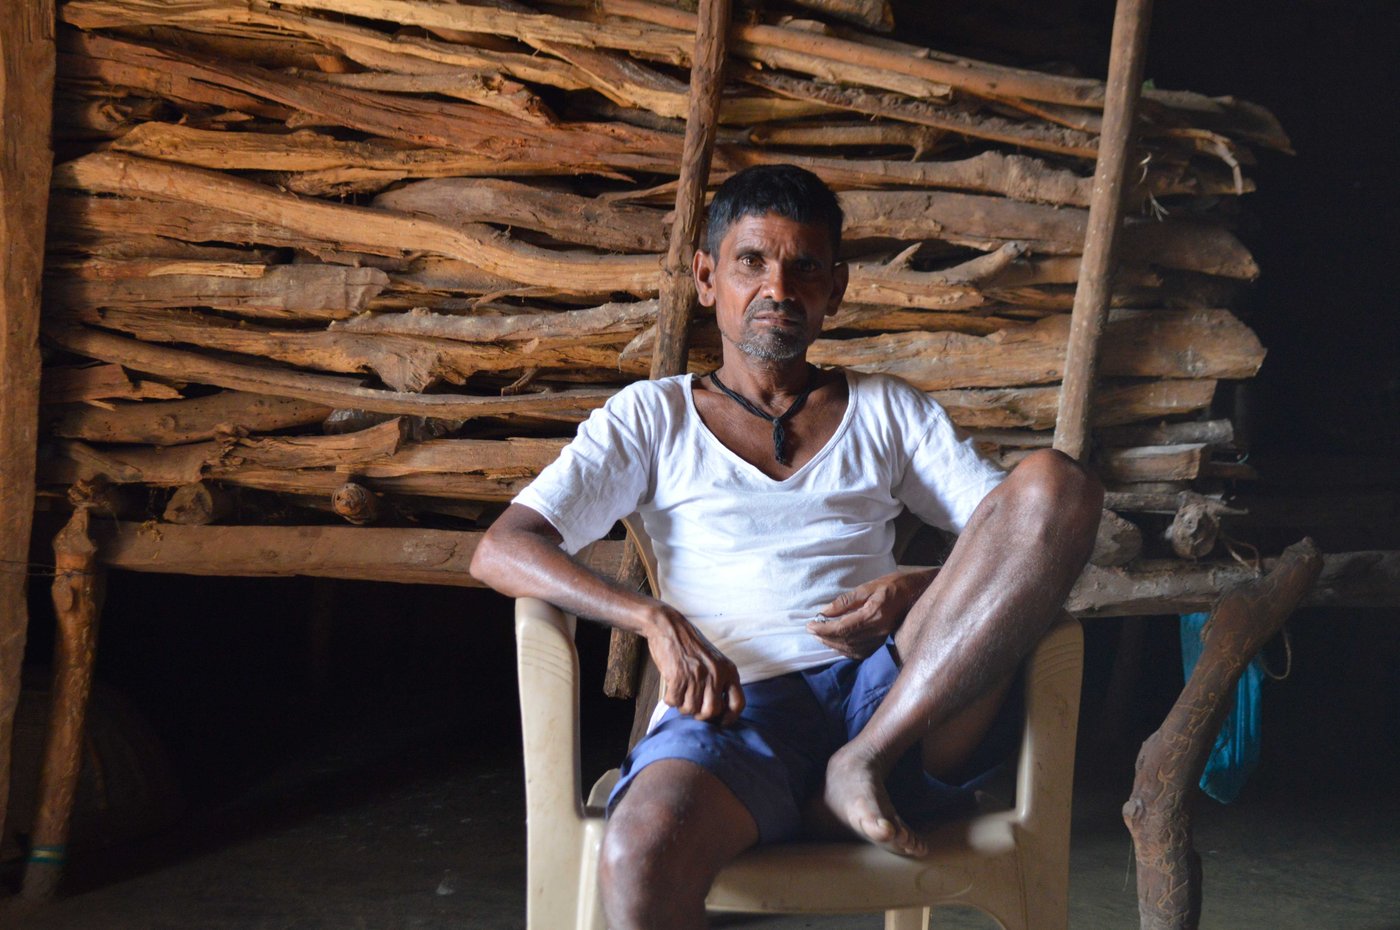 Left: Bhagat Kalu Jangali at his home in Pangri village in Mokhada taluka. Right: Bhagat Subhash Katkari with several of his clients on a Sunday at his home in Deharje village of Vikramgad taluka in Palghar district